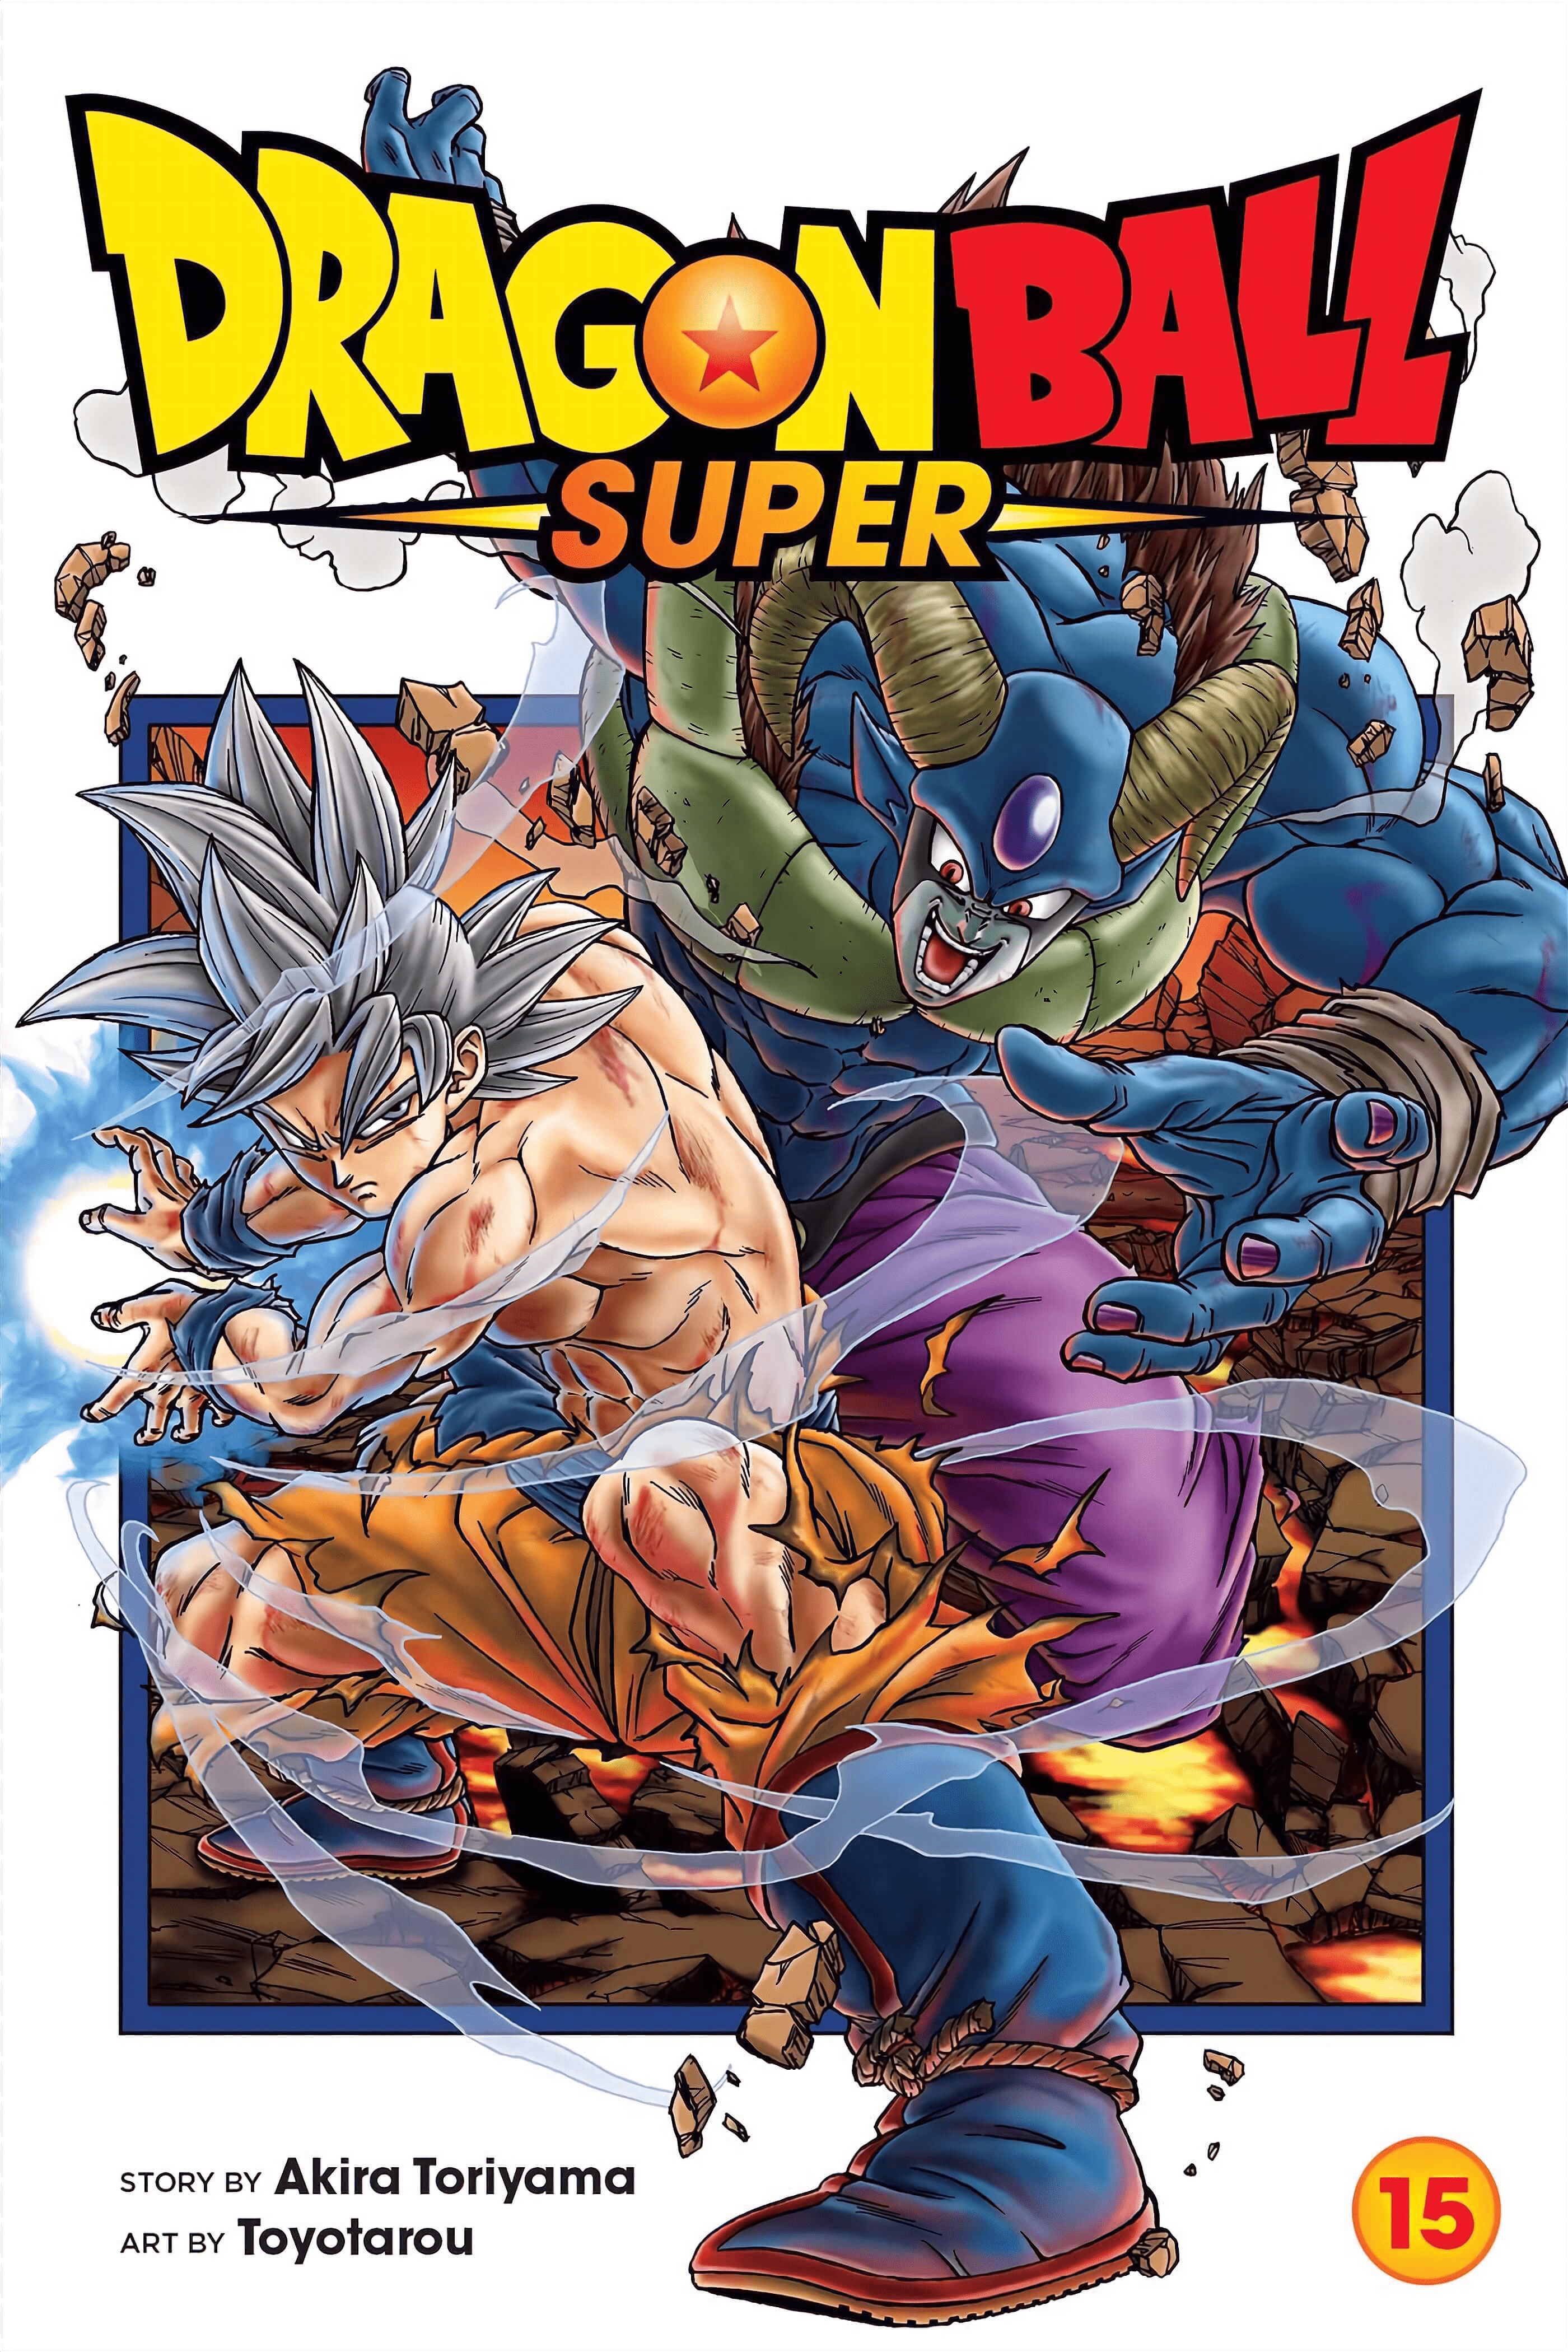 Dragon Ball Super Chapter 91 Release Date, Time